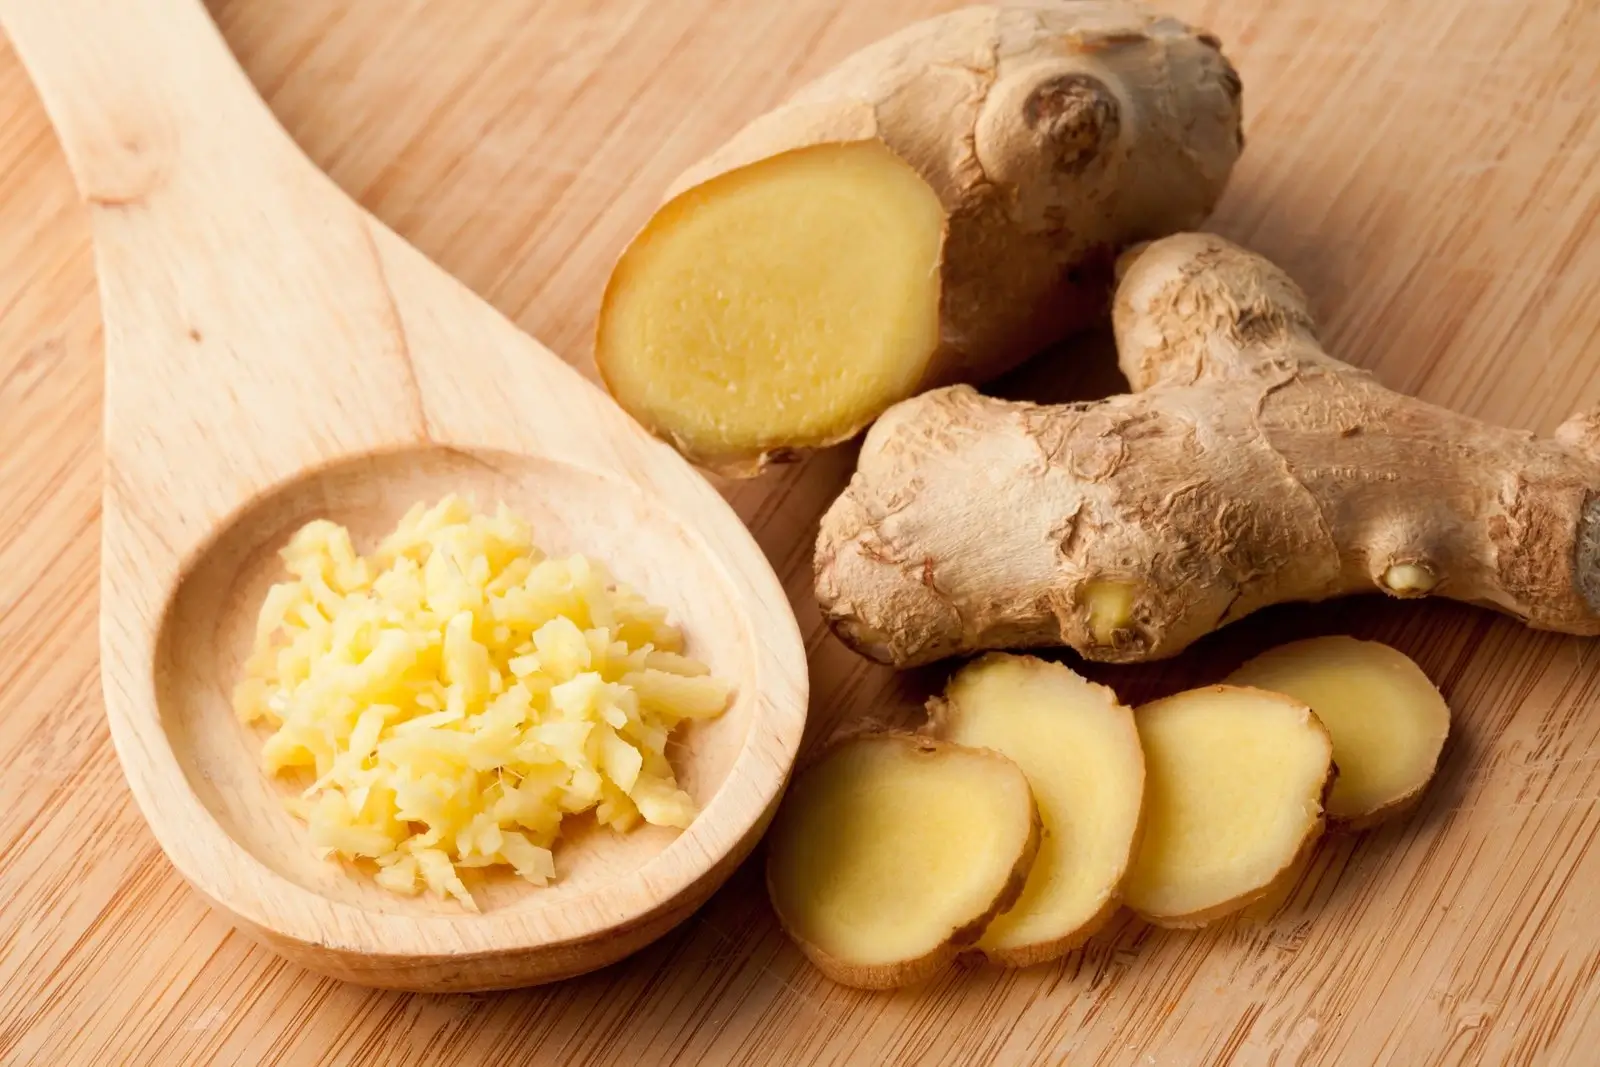 Ginger in various forms, chopped, root, wooden spoon. Ginger root for cooking and fermenting.